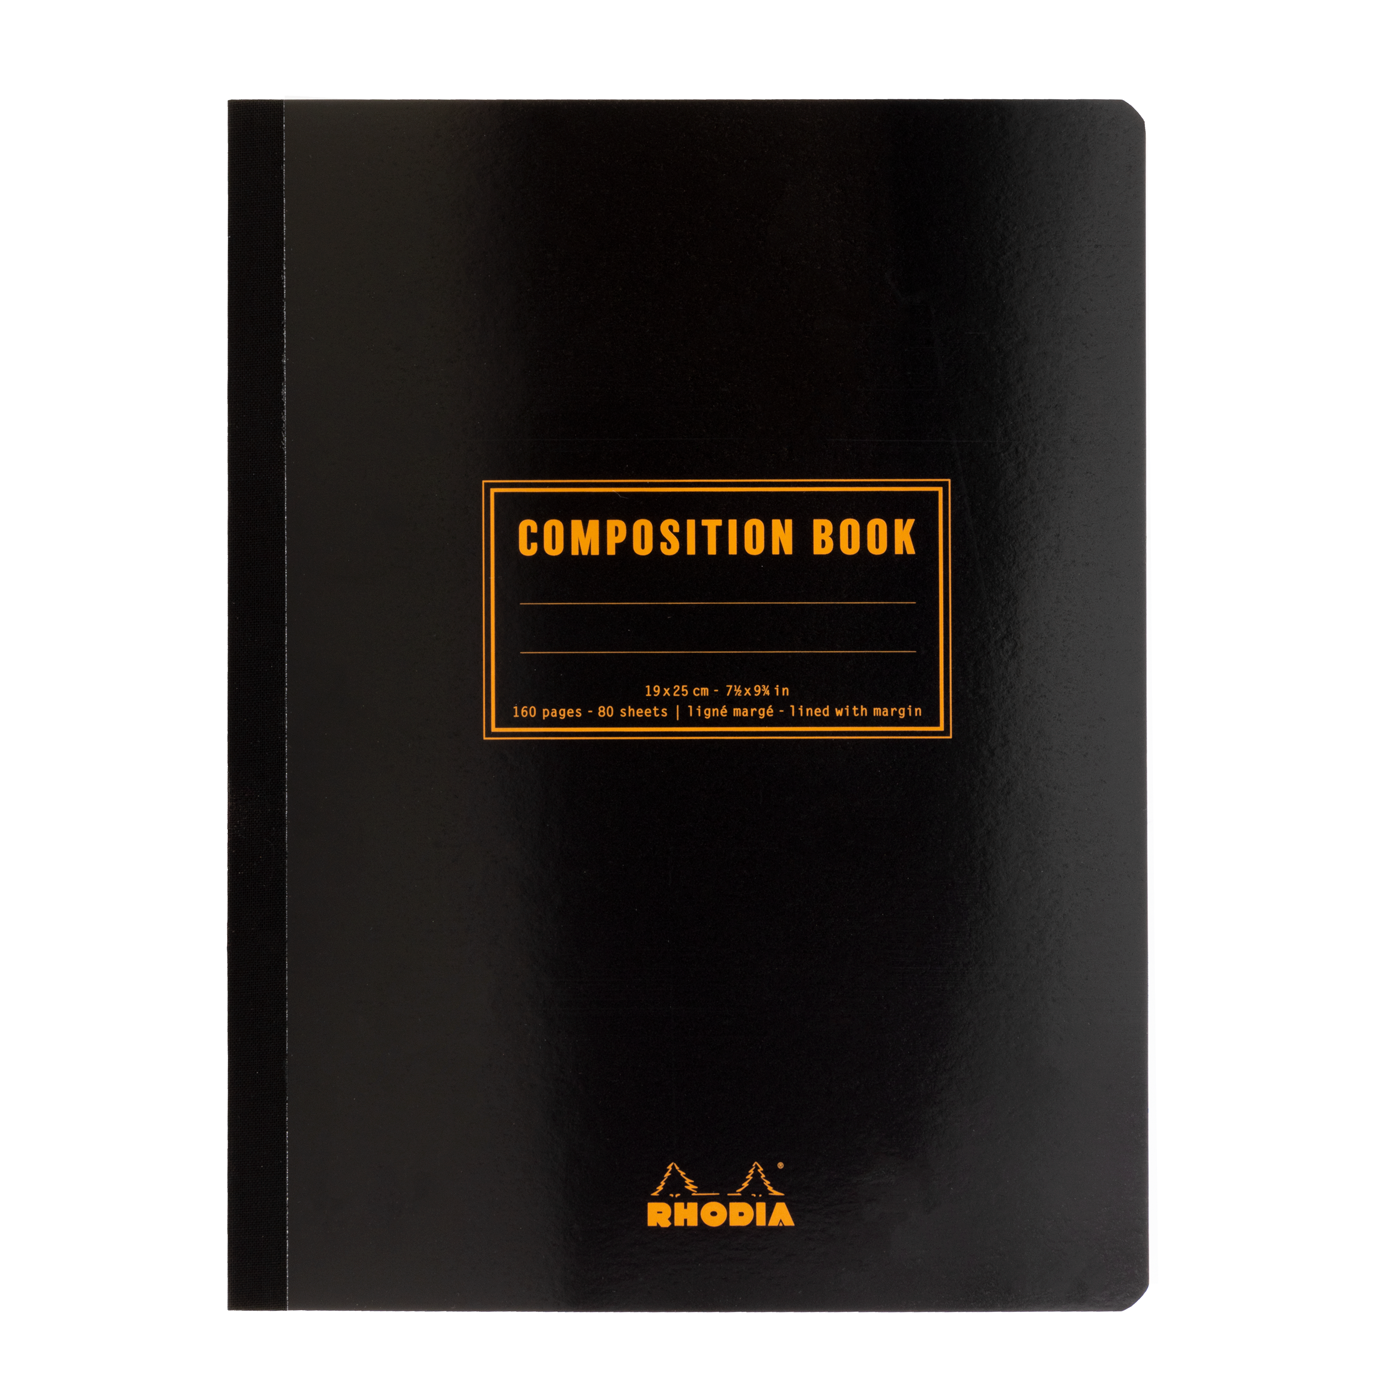 190 x 250mm (7.5 x 9.75in) 80 sheets 160 pages 80g Line spacing 7mm Lines paper with Margin, college ruled Paper color Ivory Fountain pen friendly  Super smooth, acid-free, pH neutral Canvas-back thread bound  Lined with Margin, college ruled  Classic composition book cover 